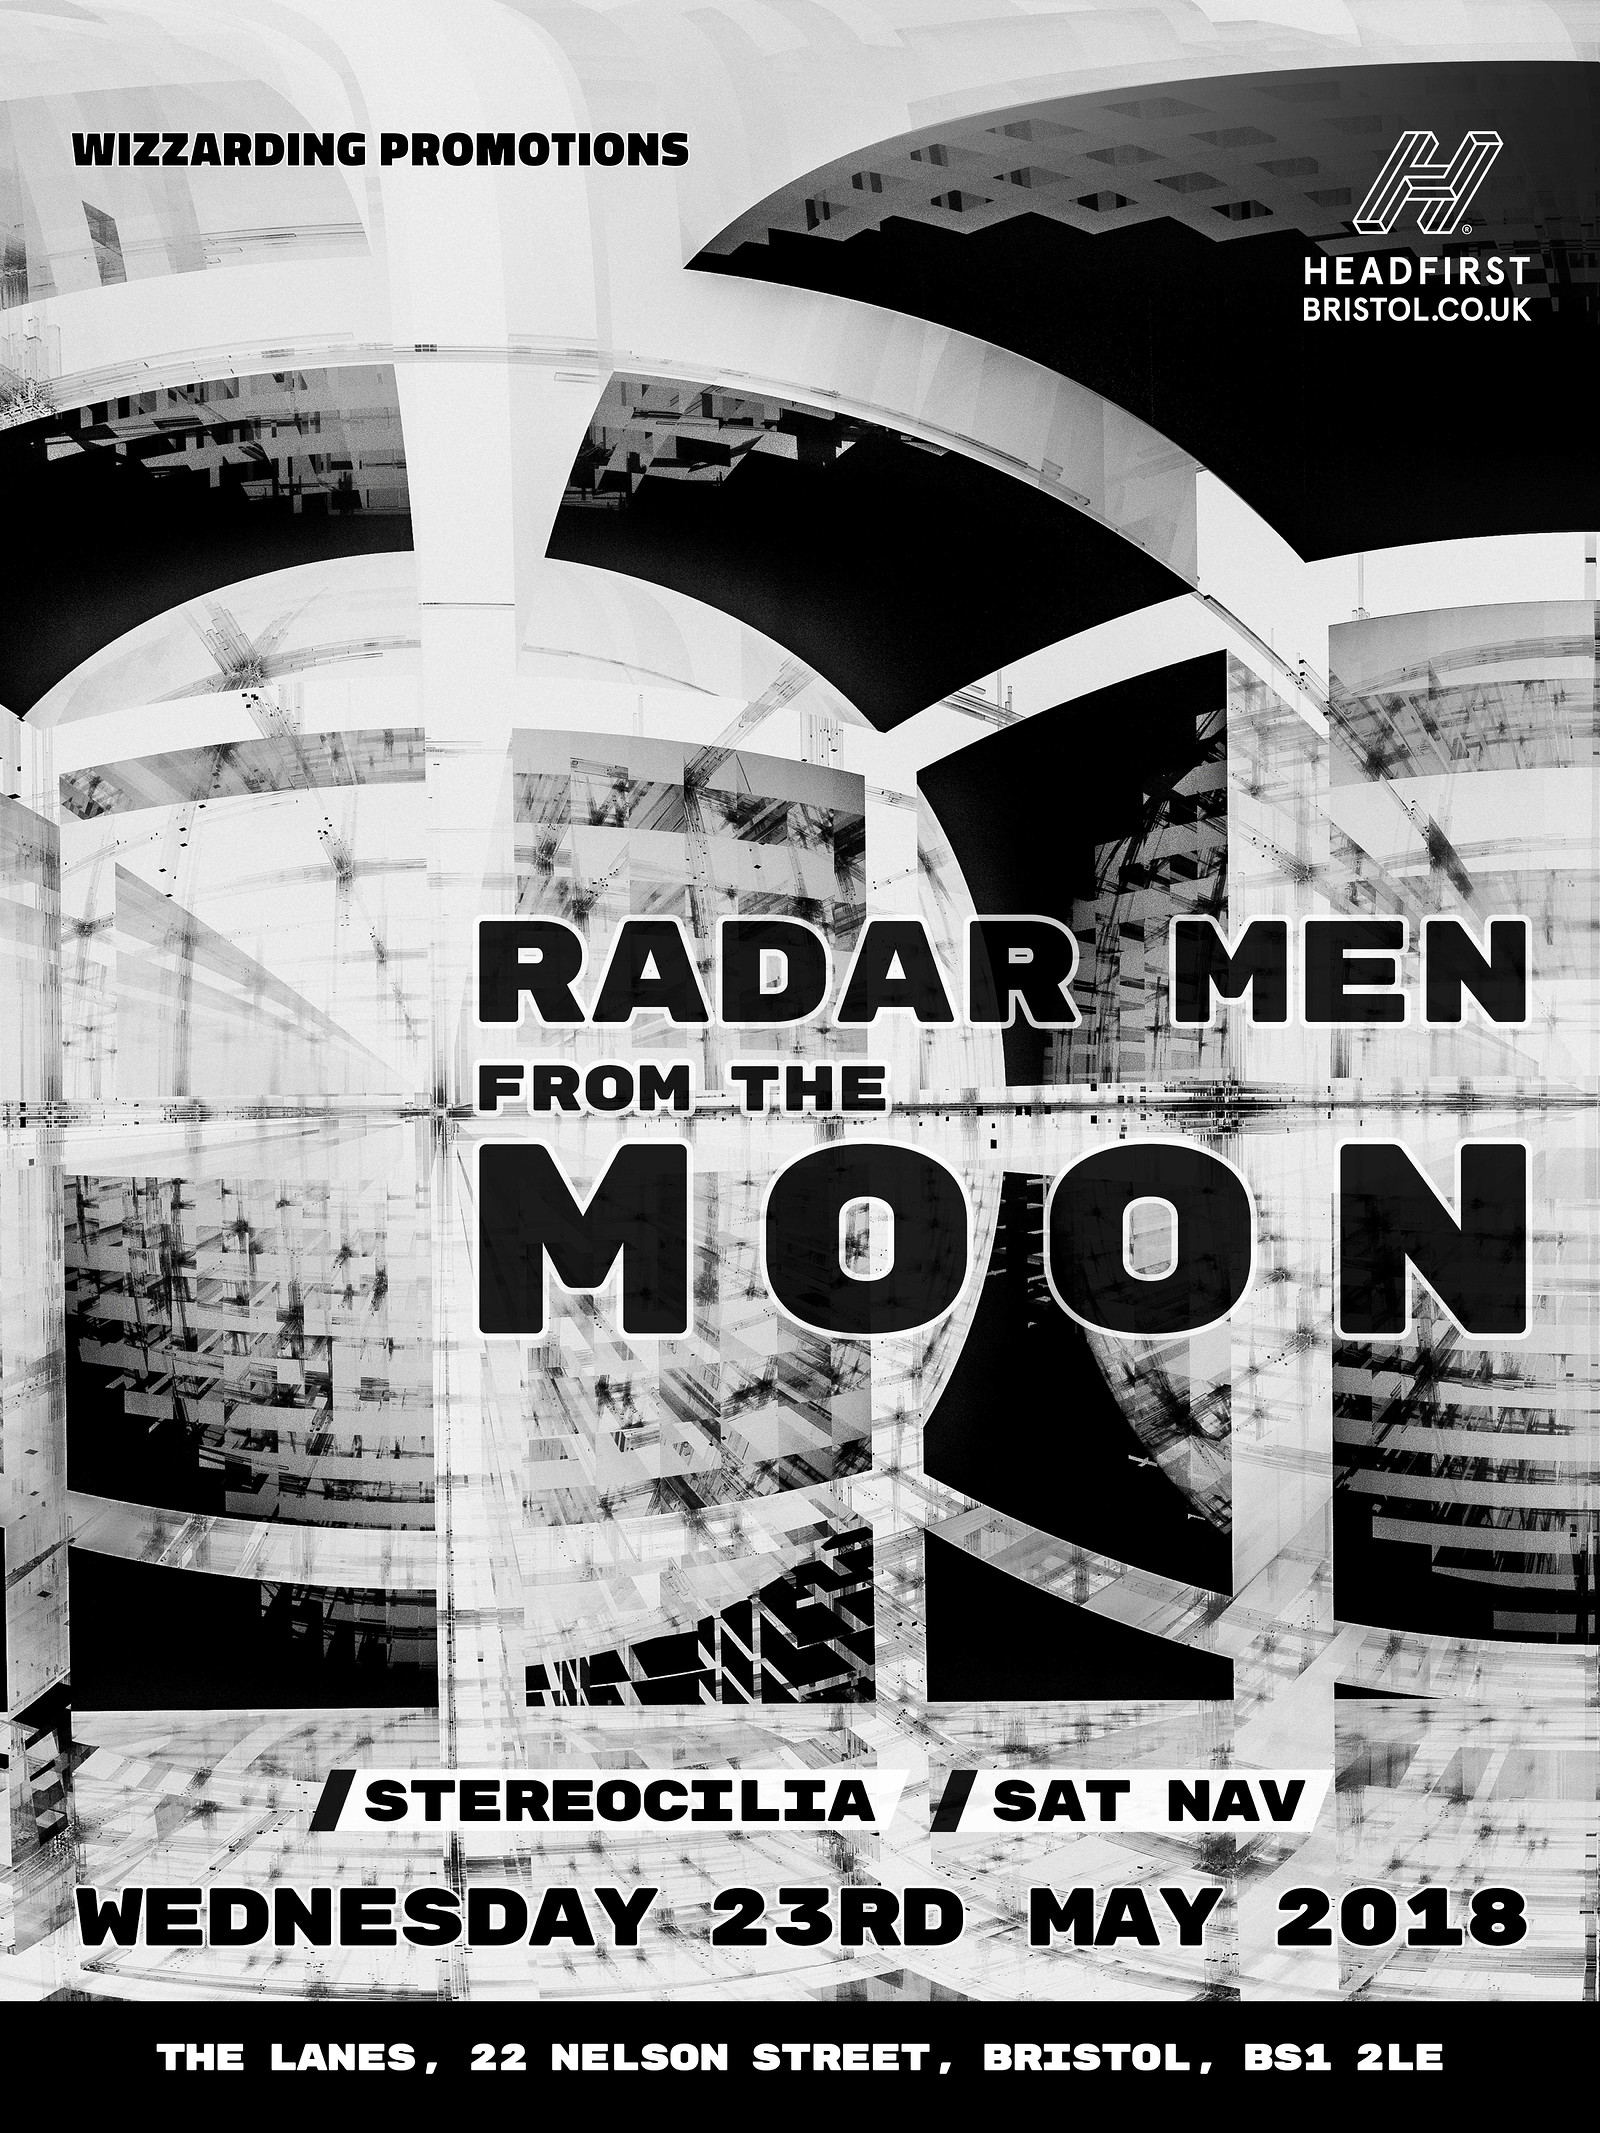 Radar Men From The Moon at The Lanes